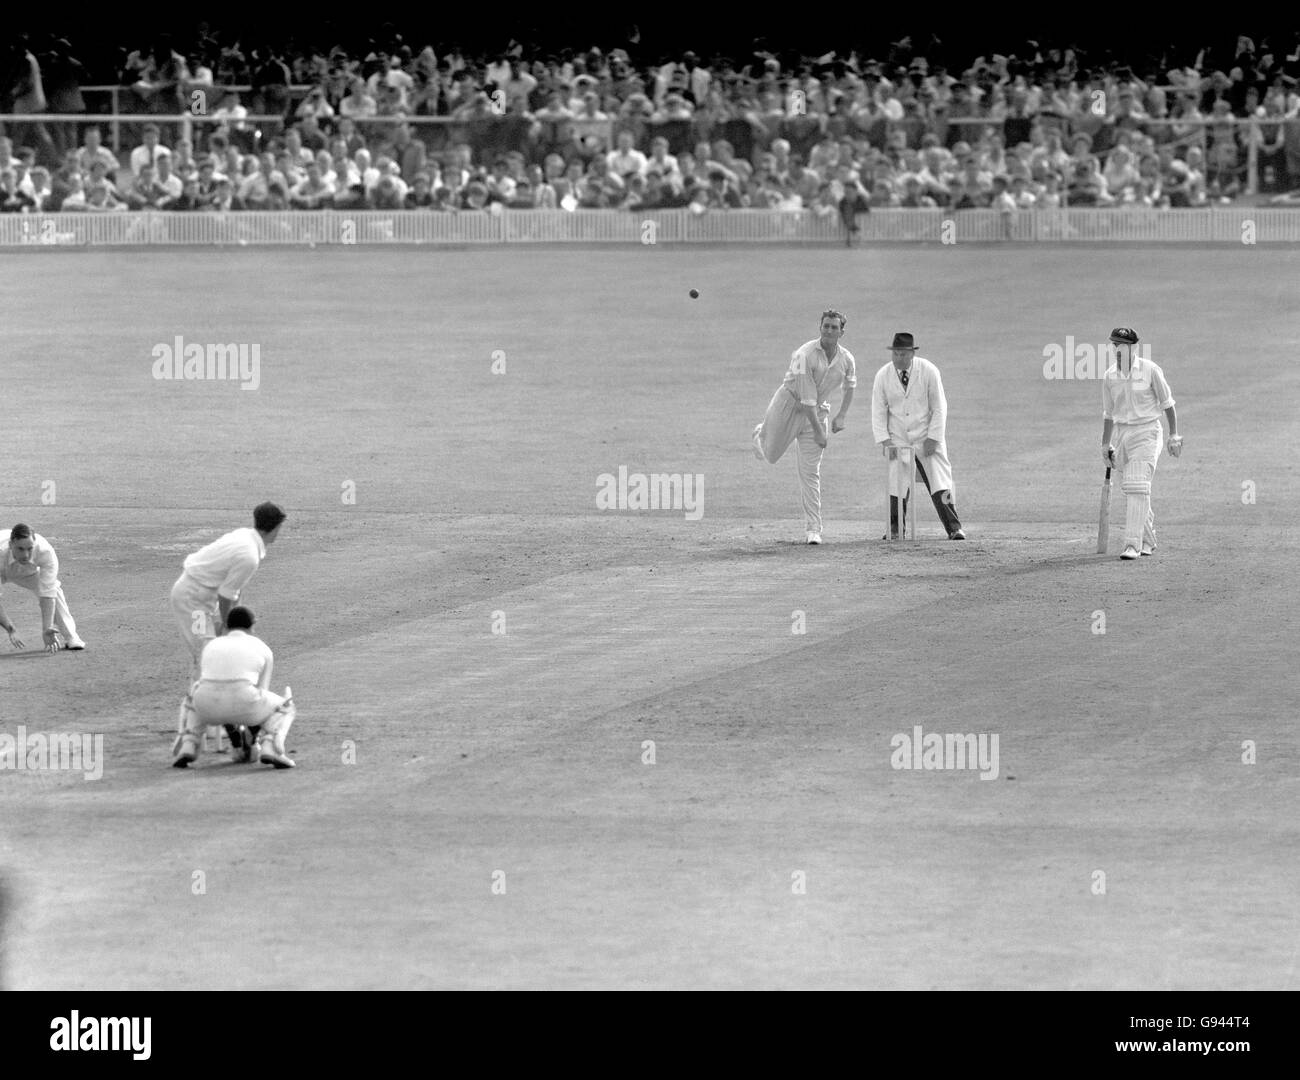 Cricket - The Ashes - Fourth Test - England v Australia - Old Trafford - Second Day. England's Jim Laker (third r), who took a record 19 wickets in the match, bowling Stock Photo